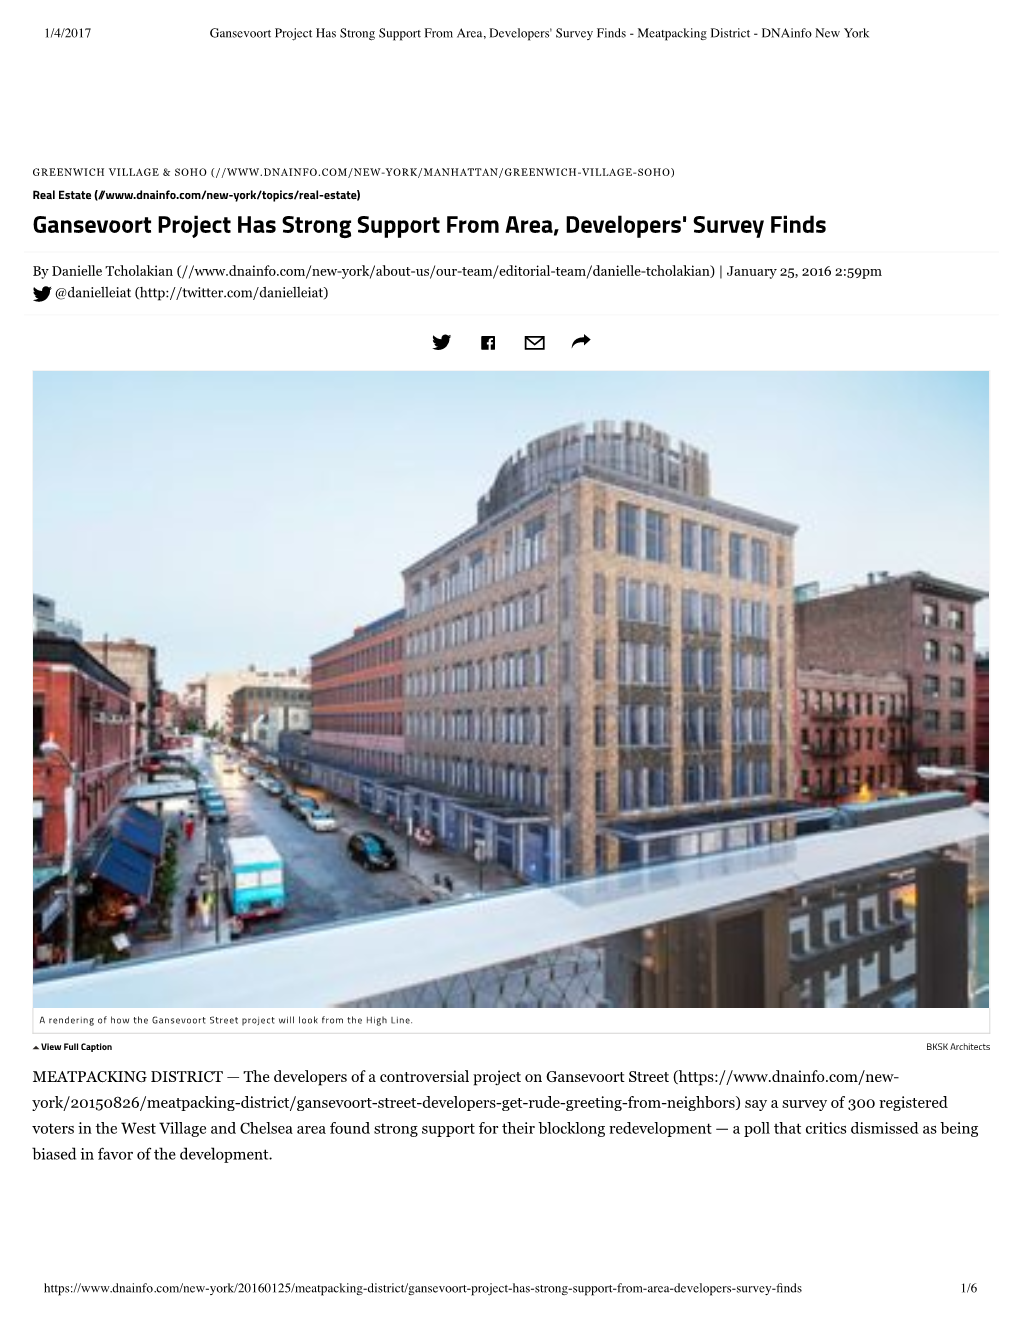 01-04-17-Gansevoort-Project-Has-Strong-Support-From-Area.Pdf